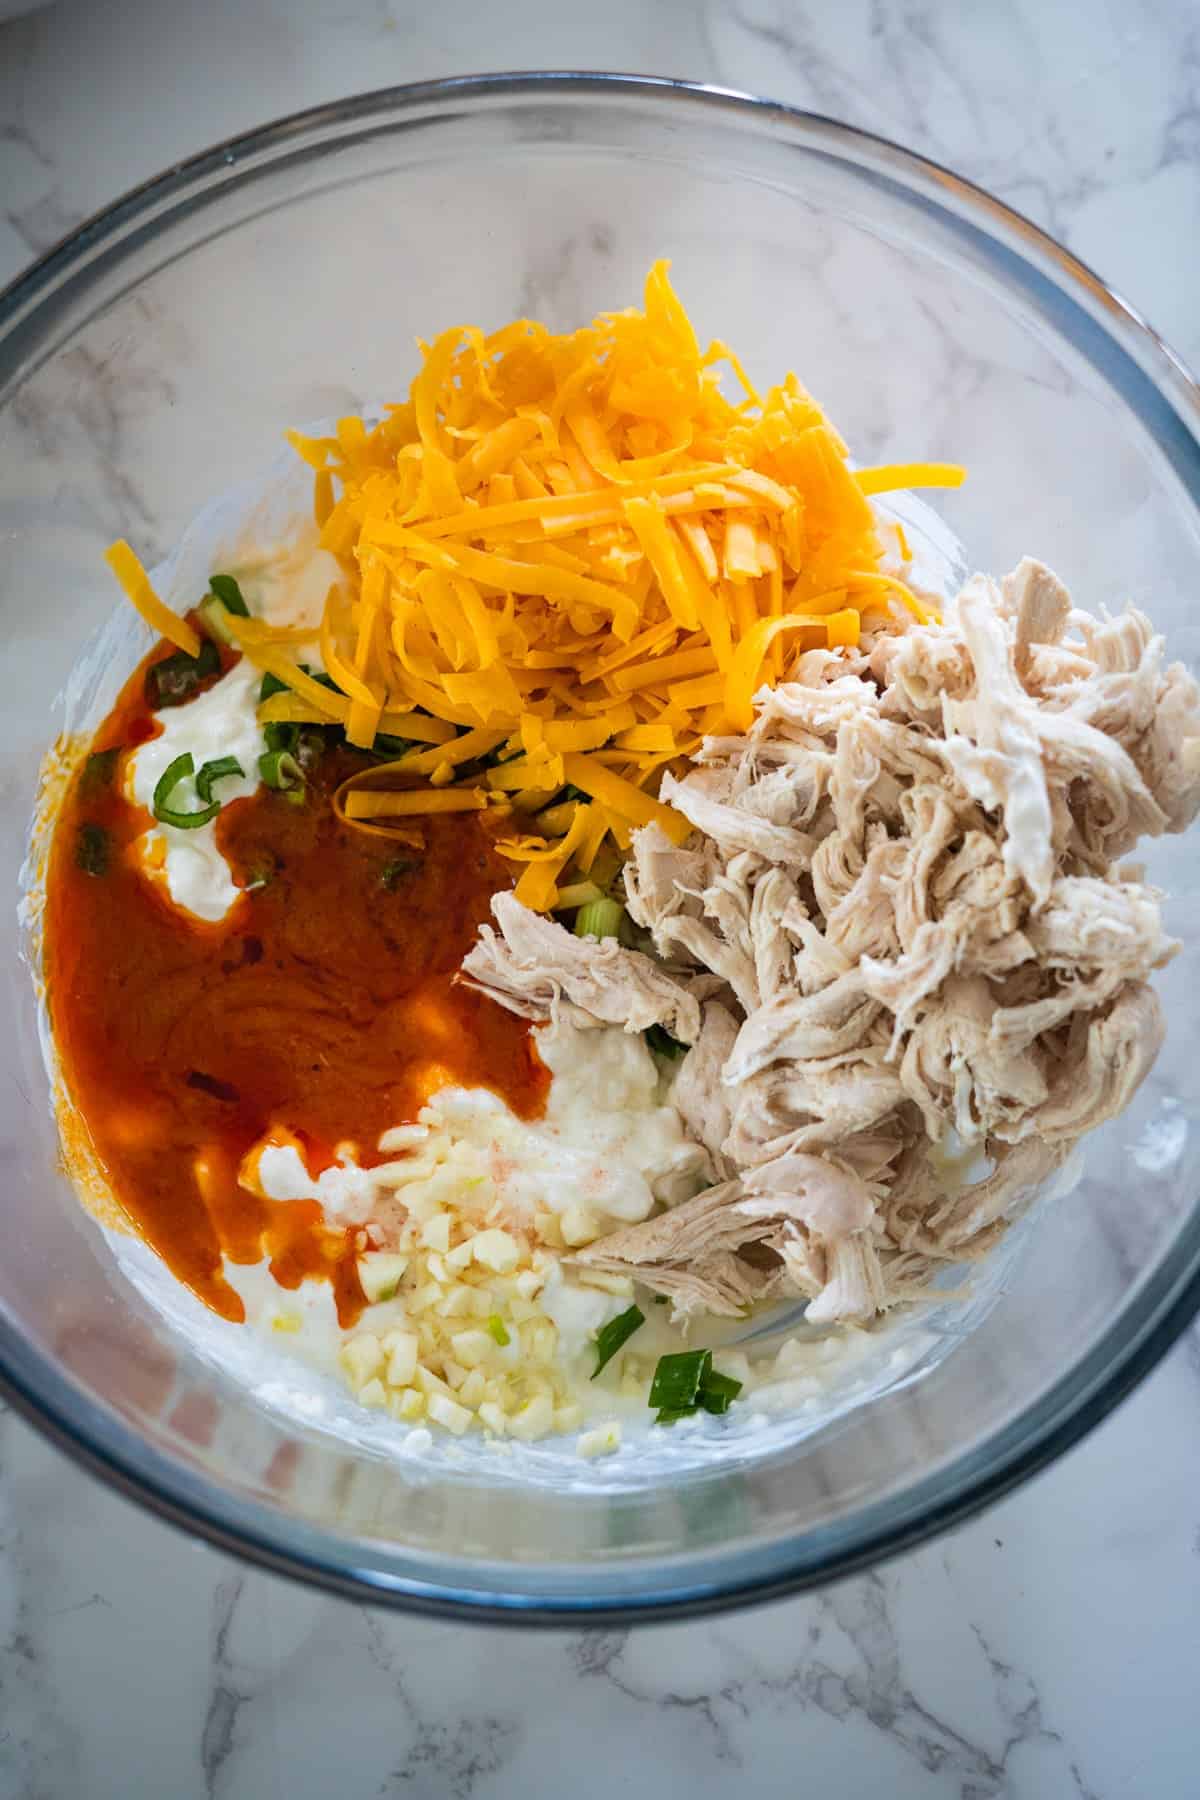 The ingredients for a buffalo chicken taco salad in a glass bowl.